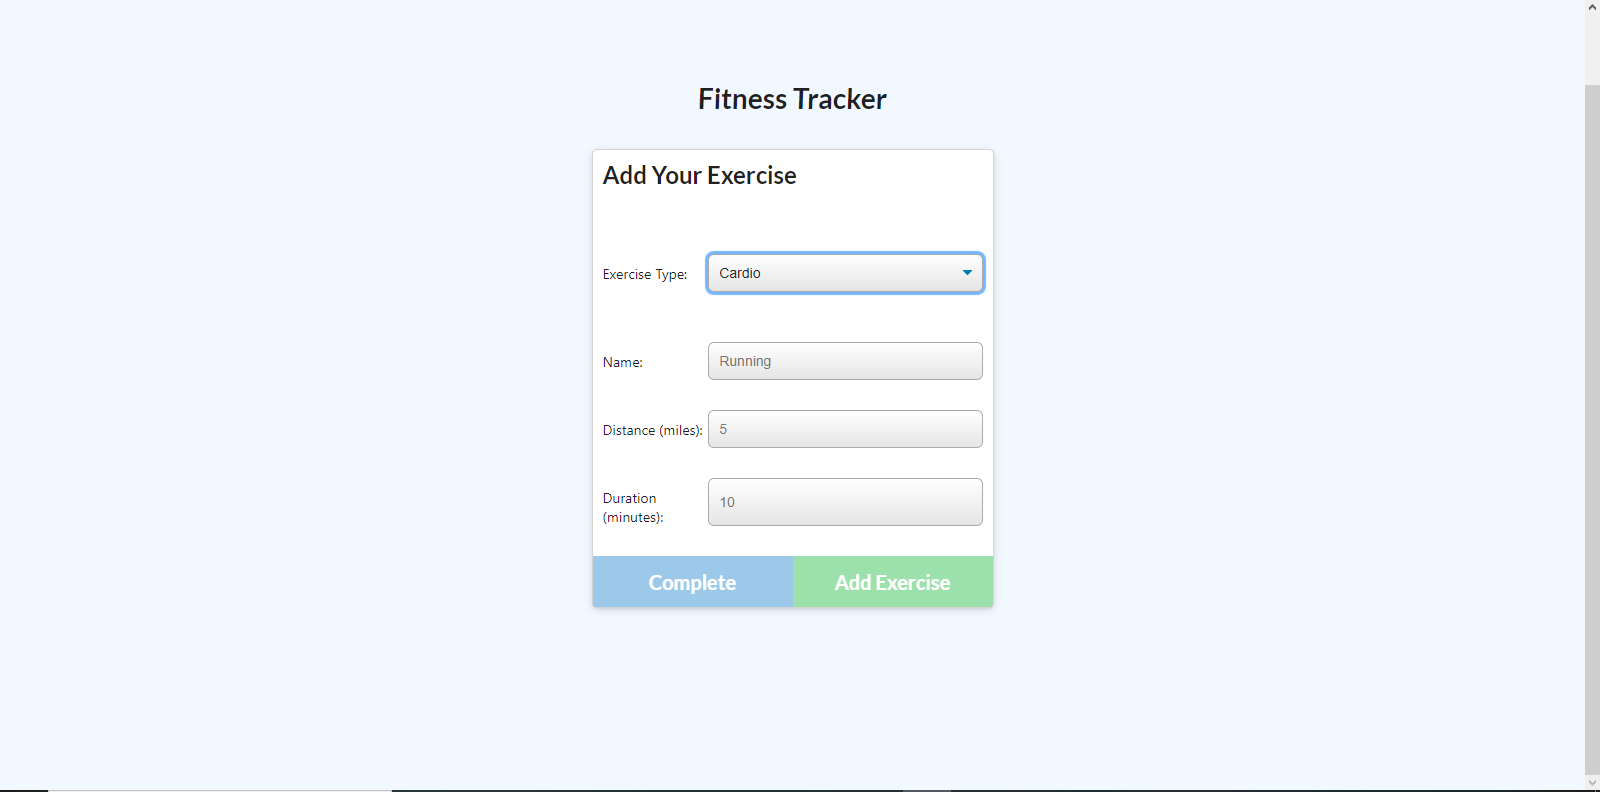 A form allowing the user to enter workout information